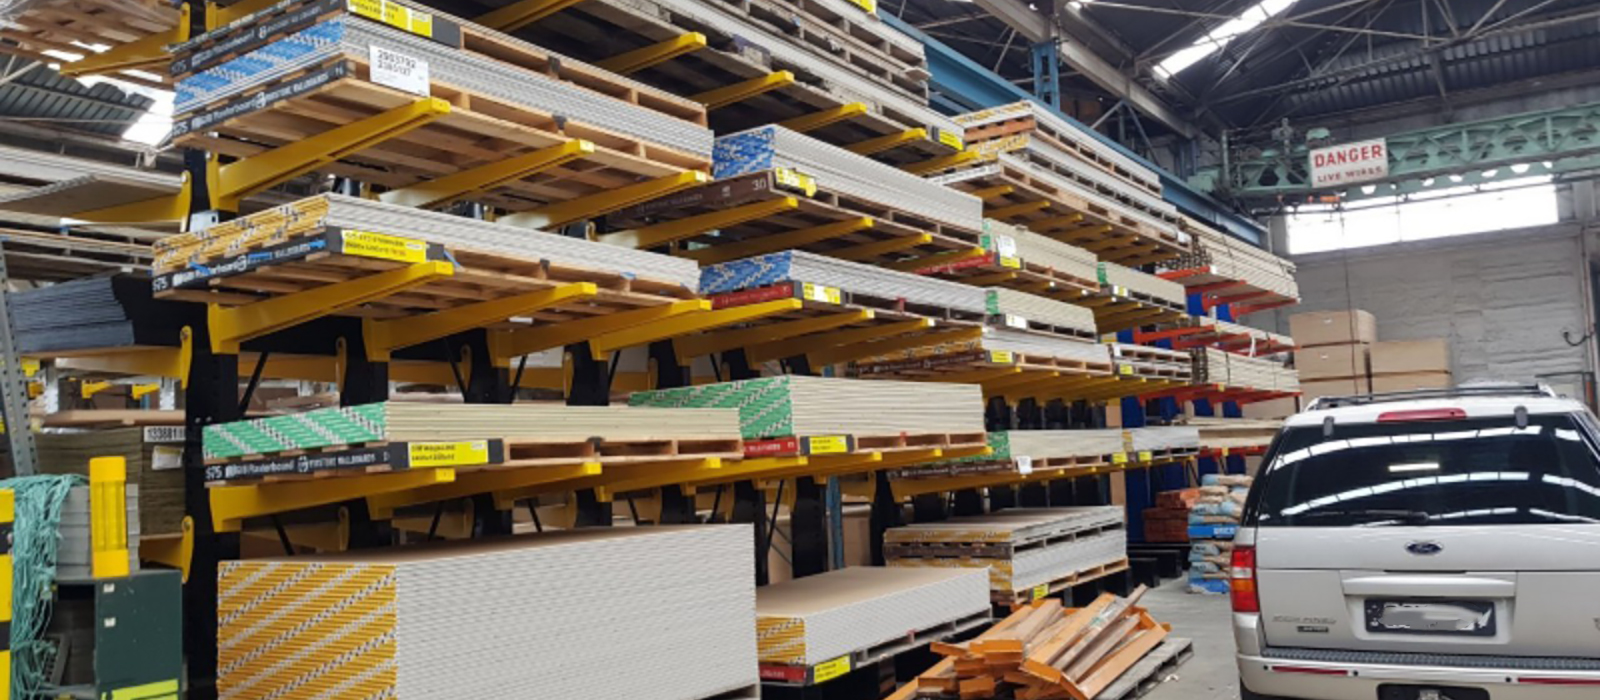 EH Ball iTM, Cantilever Racking, Pallet Racking